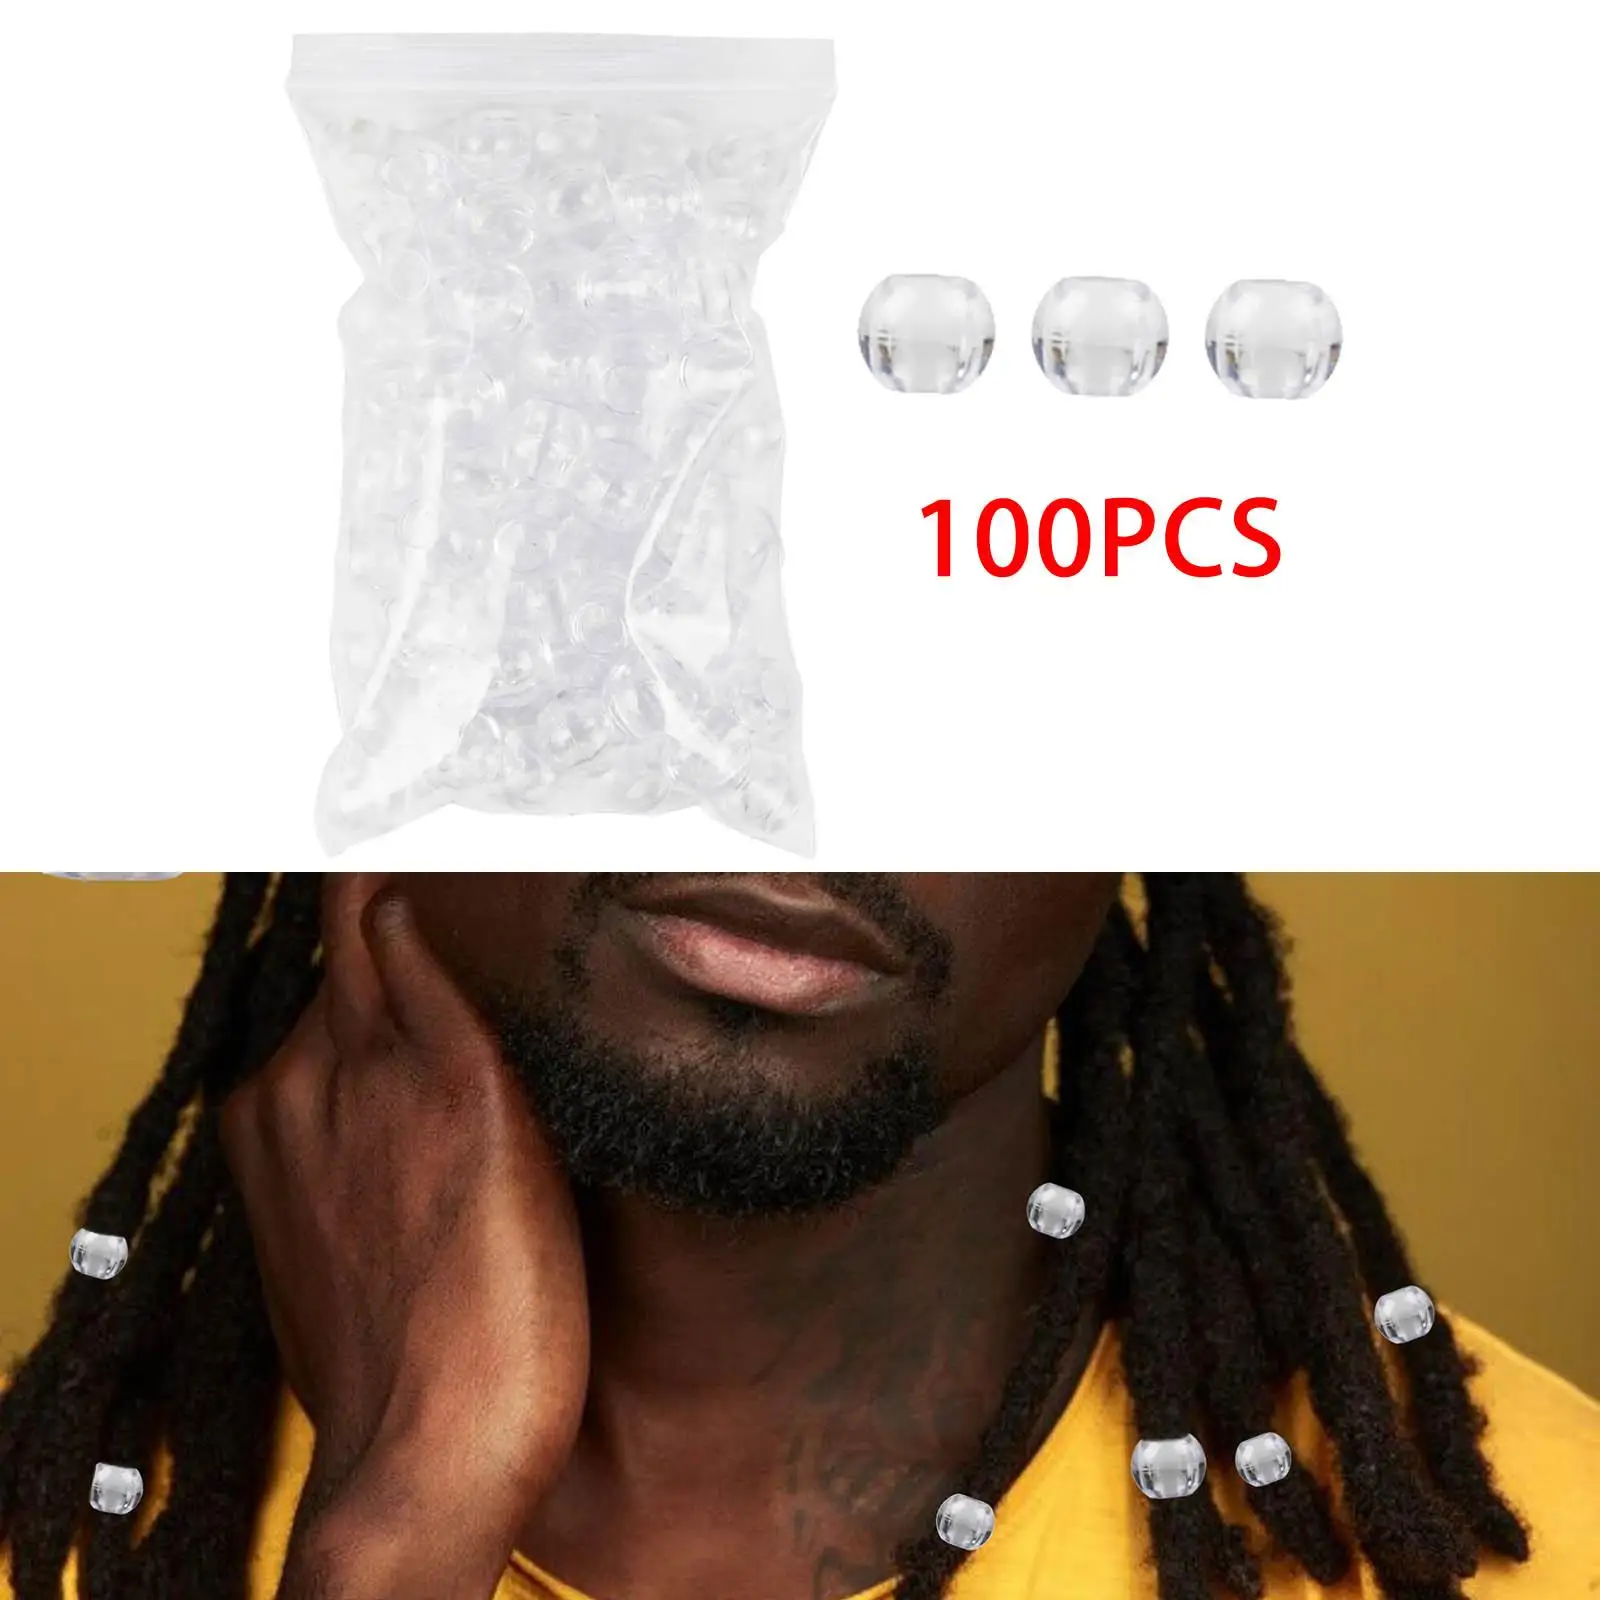 100Pcs Dreadlock Beads 16mm Dia Big Hole Crafts Kit Clear Hair Extension Beads for Dreadlock Wig Salon Make up Party Link Hair